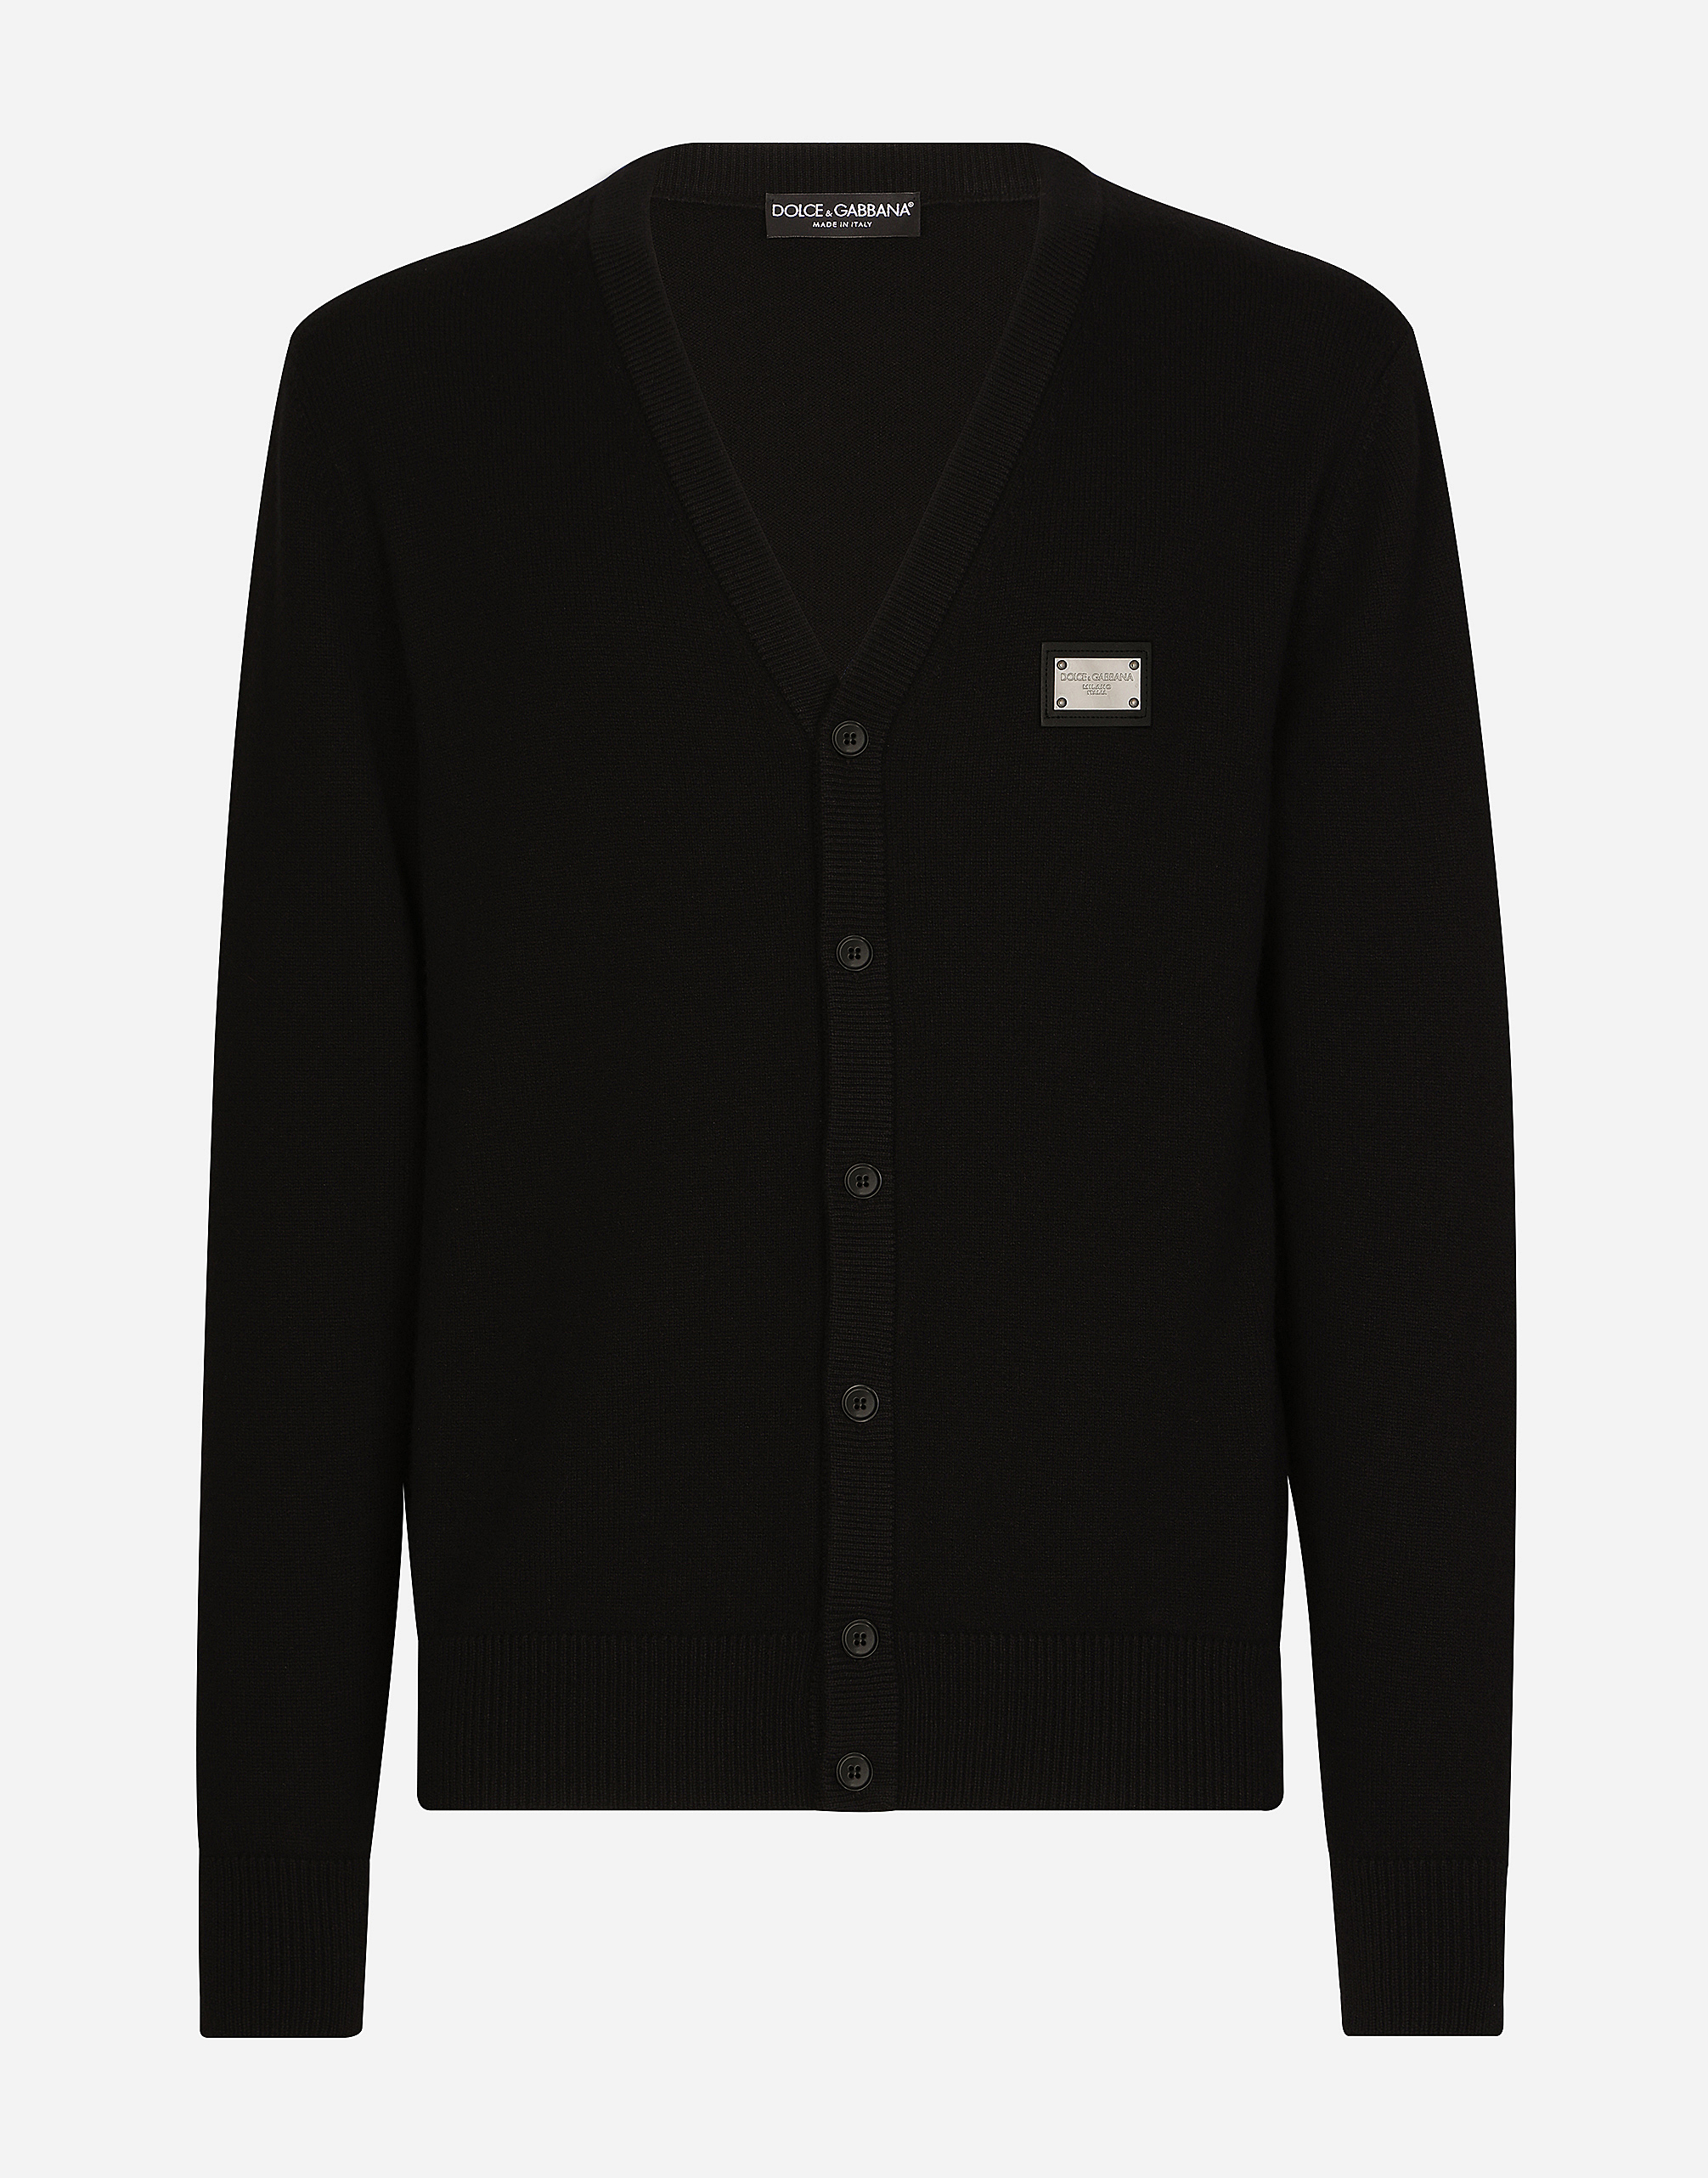 Dolce & Gabbana Cashmere And Wool Cardigan With Branded Tag In Black